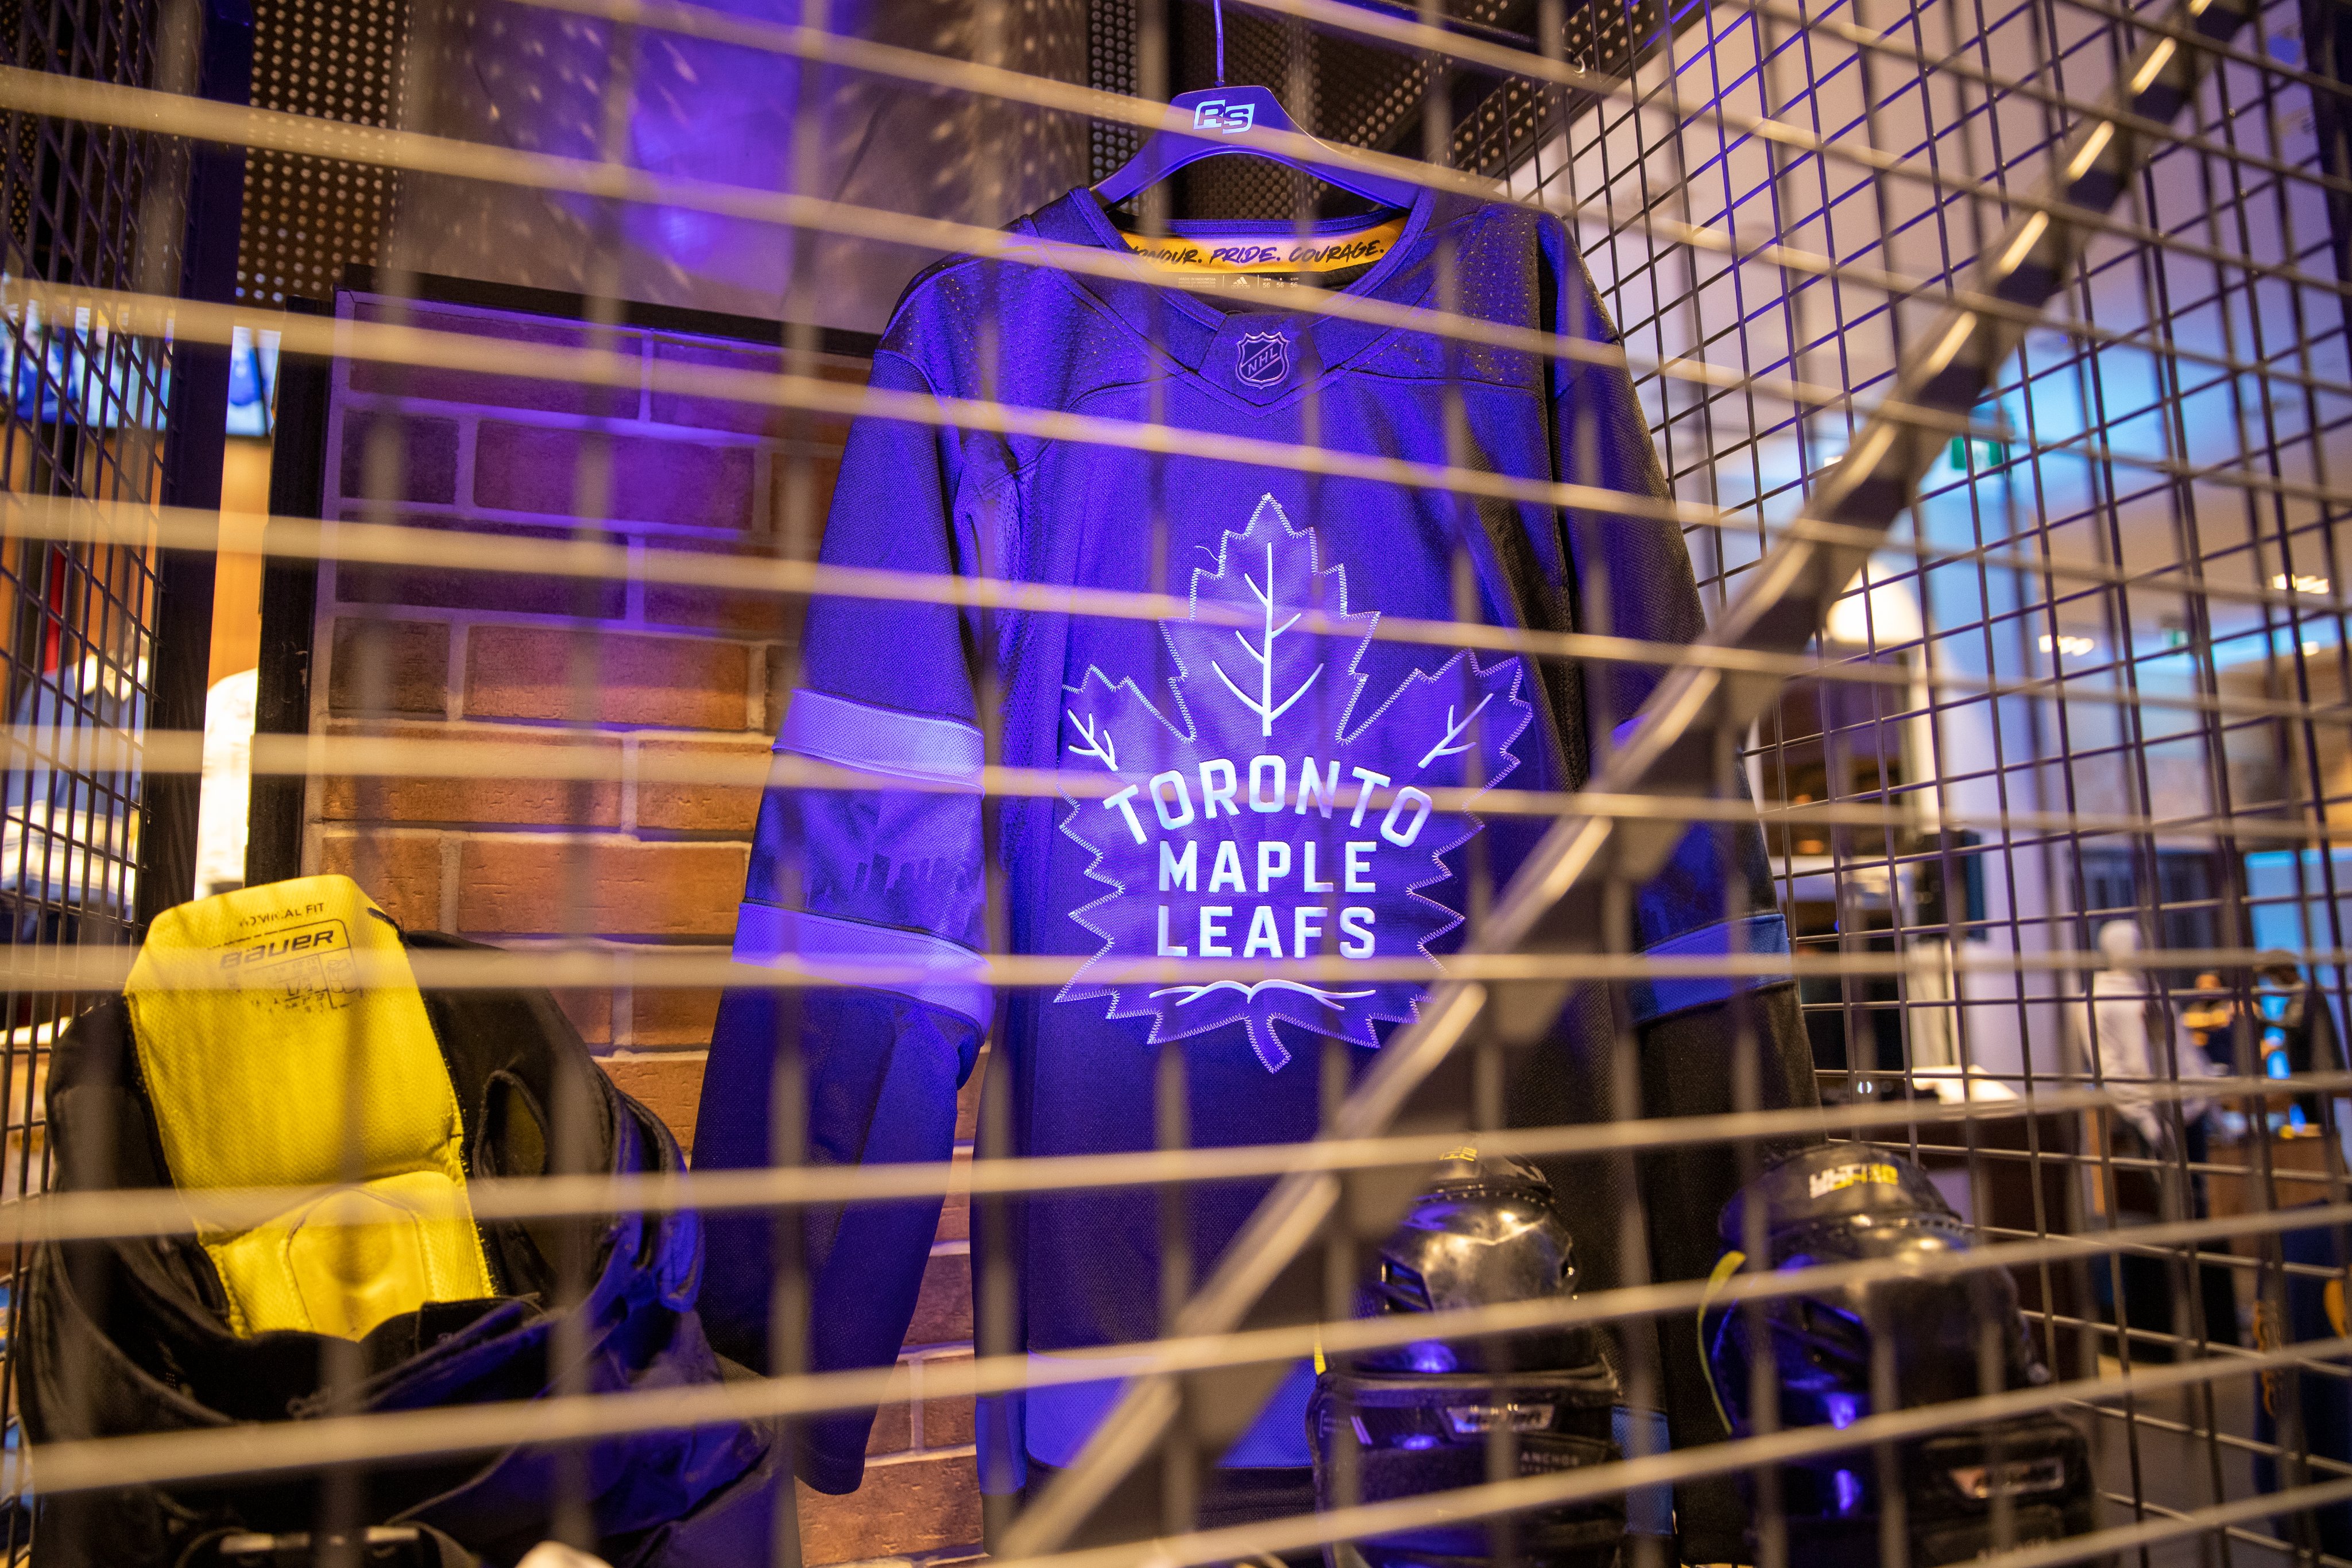 Toronto Maple Leafs on X: #LeafsForever x @drewhouse Coming soon